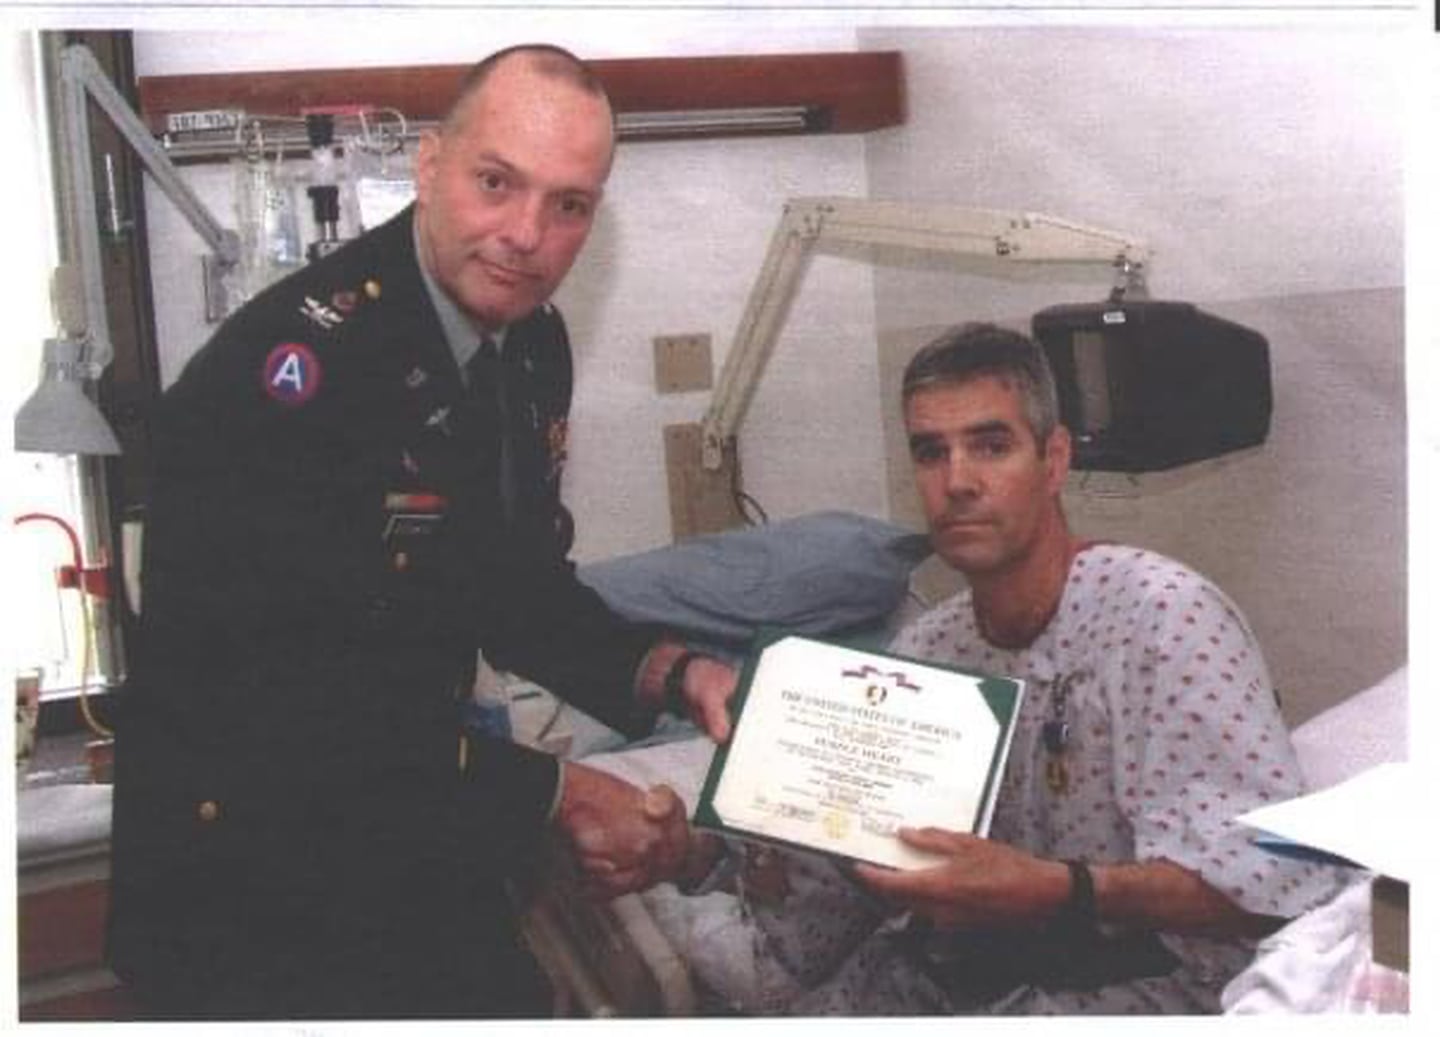 Army Sgt. 1st Class Joe Bowser sits in his hospital bed and holds a certificate for his Purple Heart award as he shakes the hand of the individual presenting him the award.